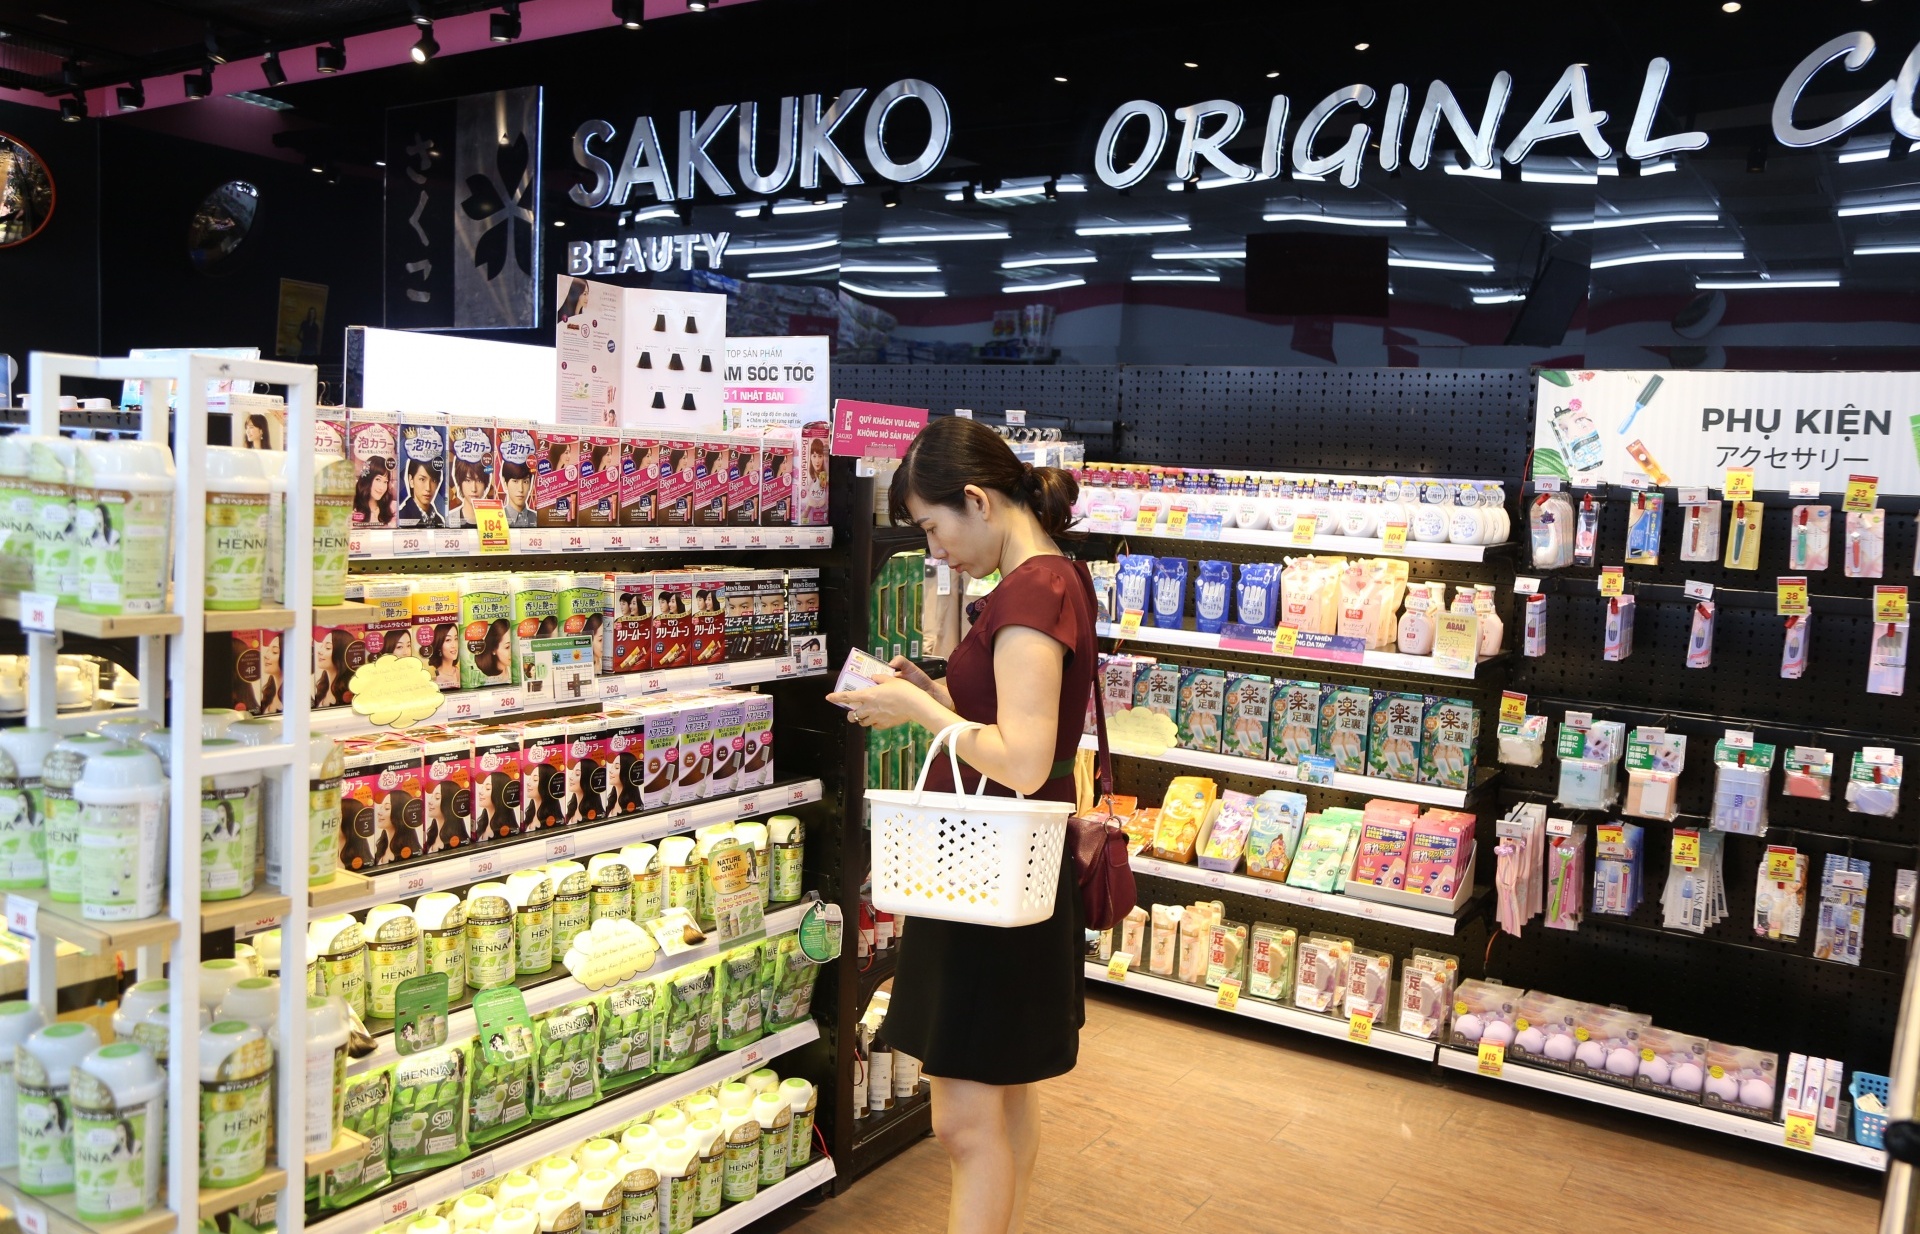 Japanese retailers are committed to the huge potential of the Vietnamese market